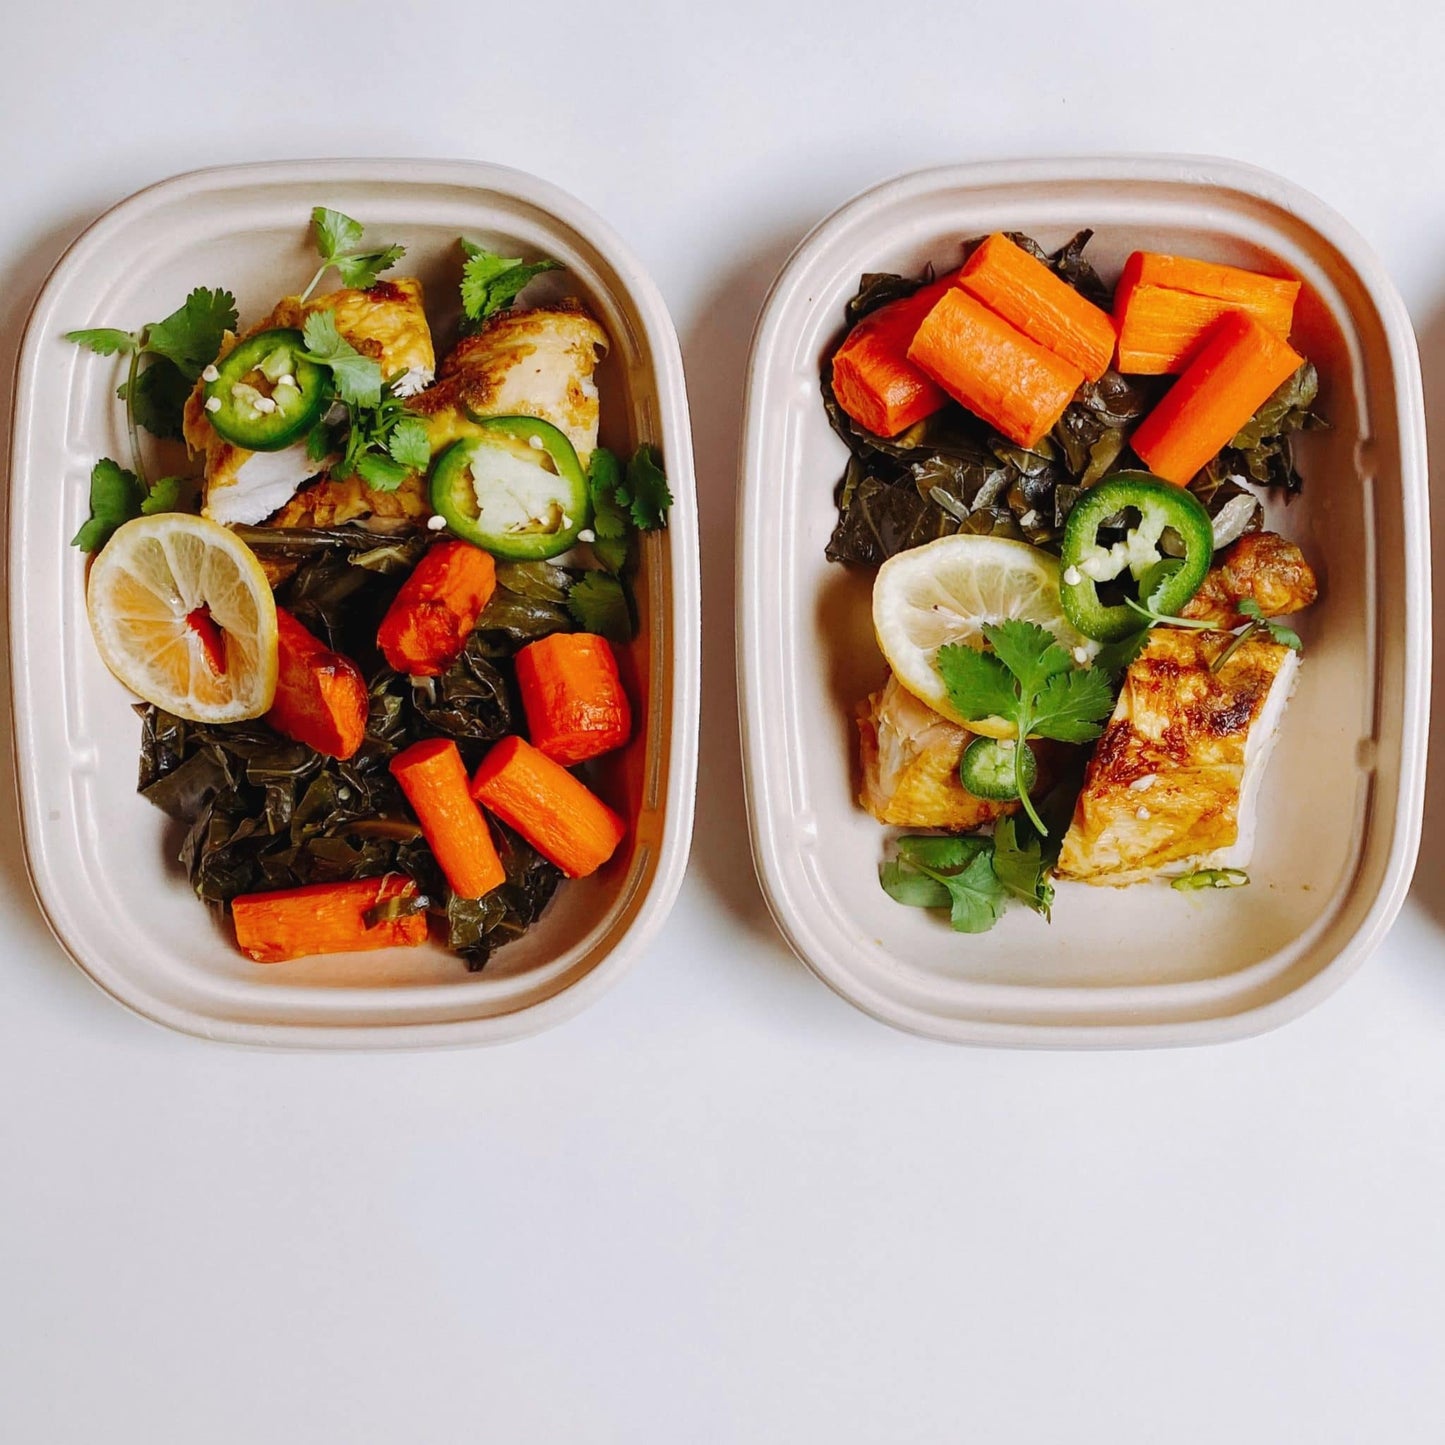 Healthy Meal Deliveries in Oregon